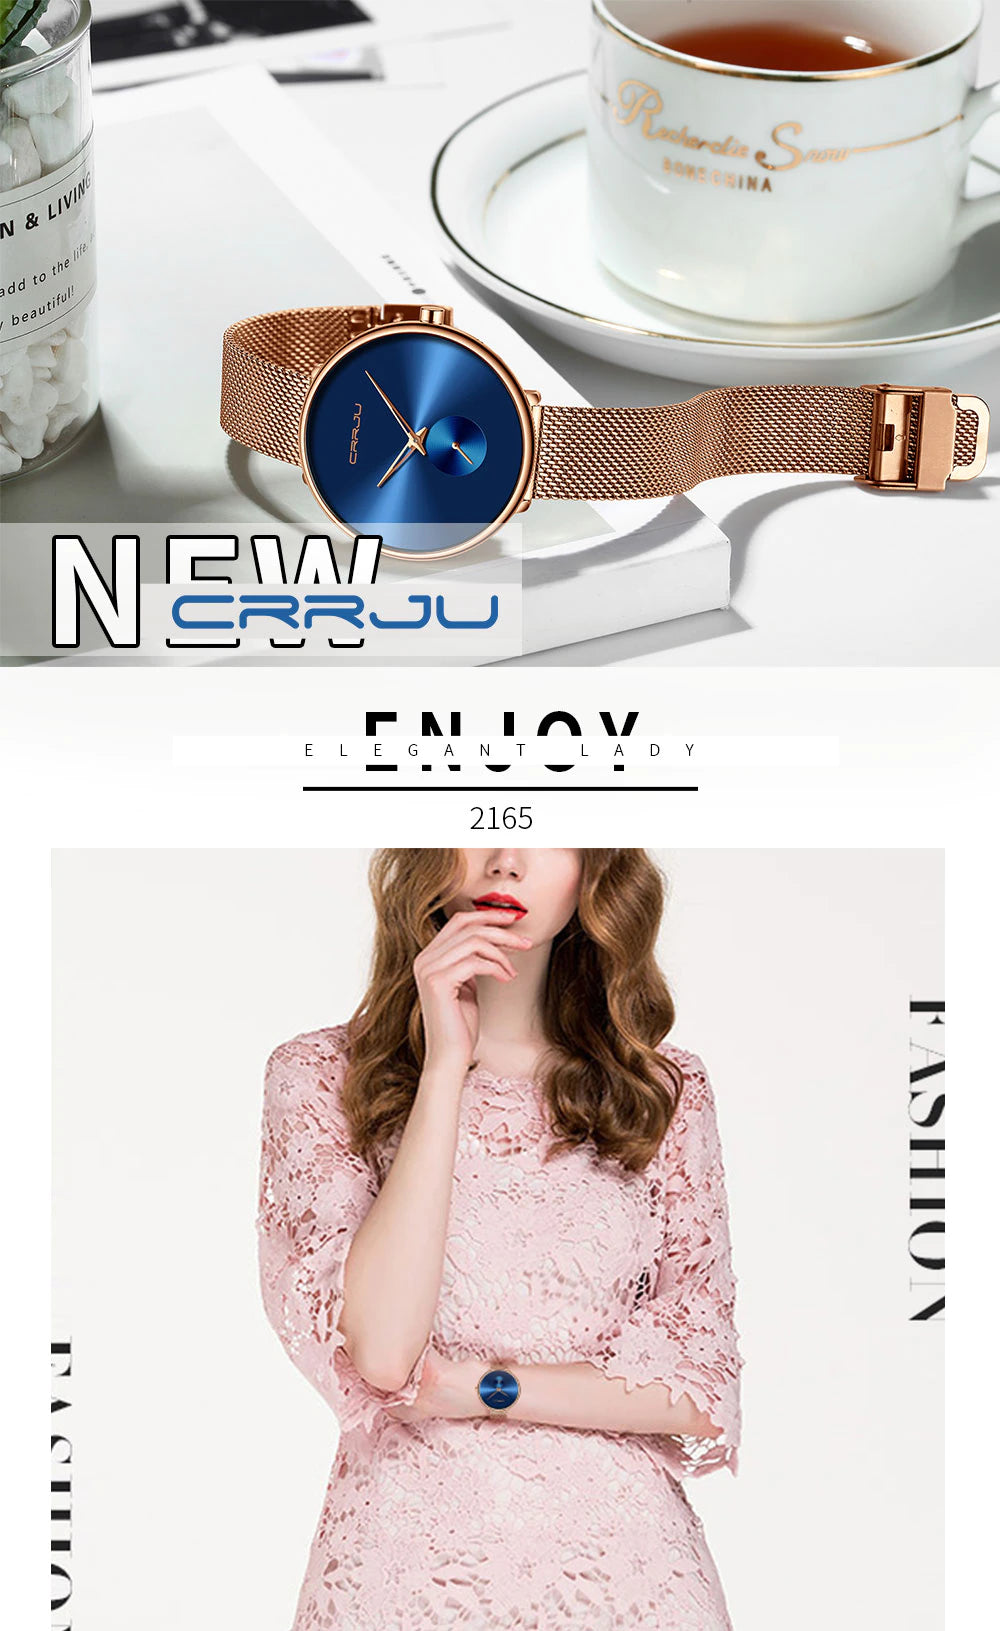 Crrju Rose Gold and Blue Ladies Watches